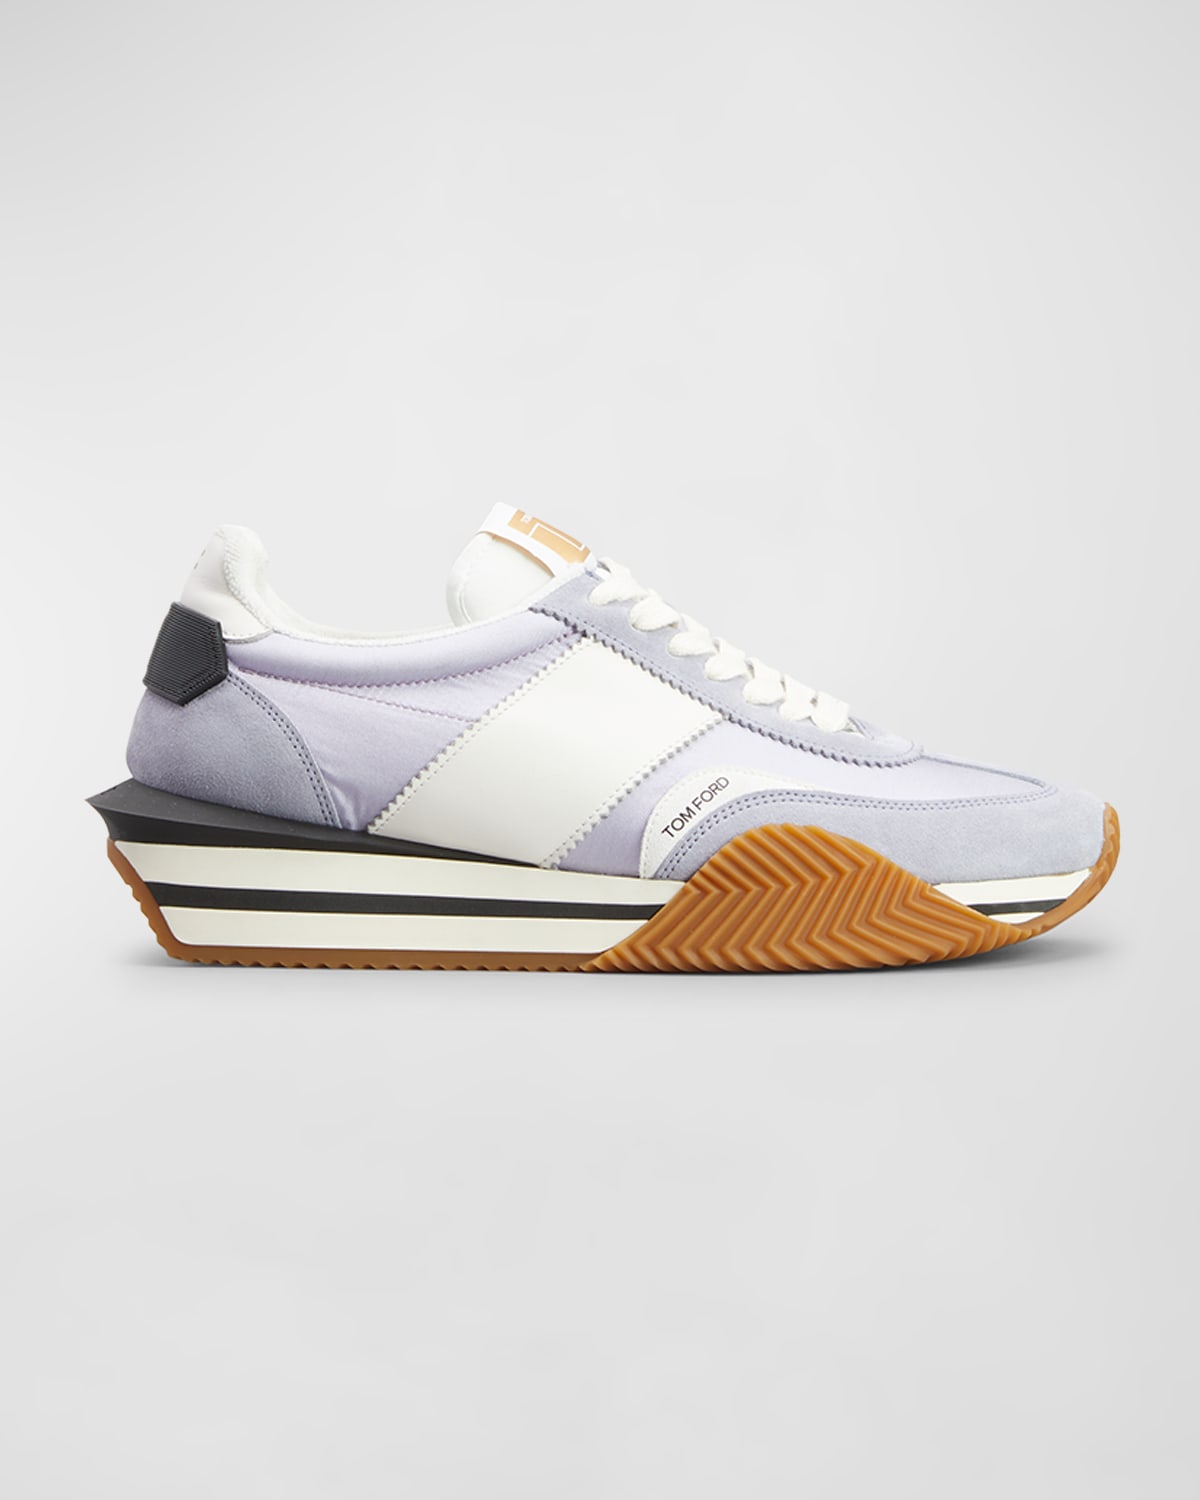 Tom Ford James Low Top Sneakers In Pale Blue/white